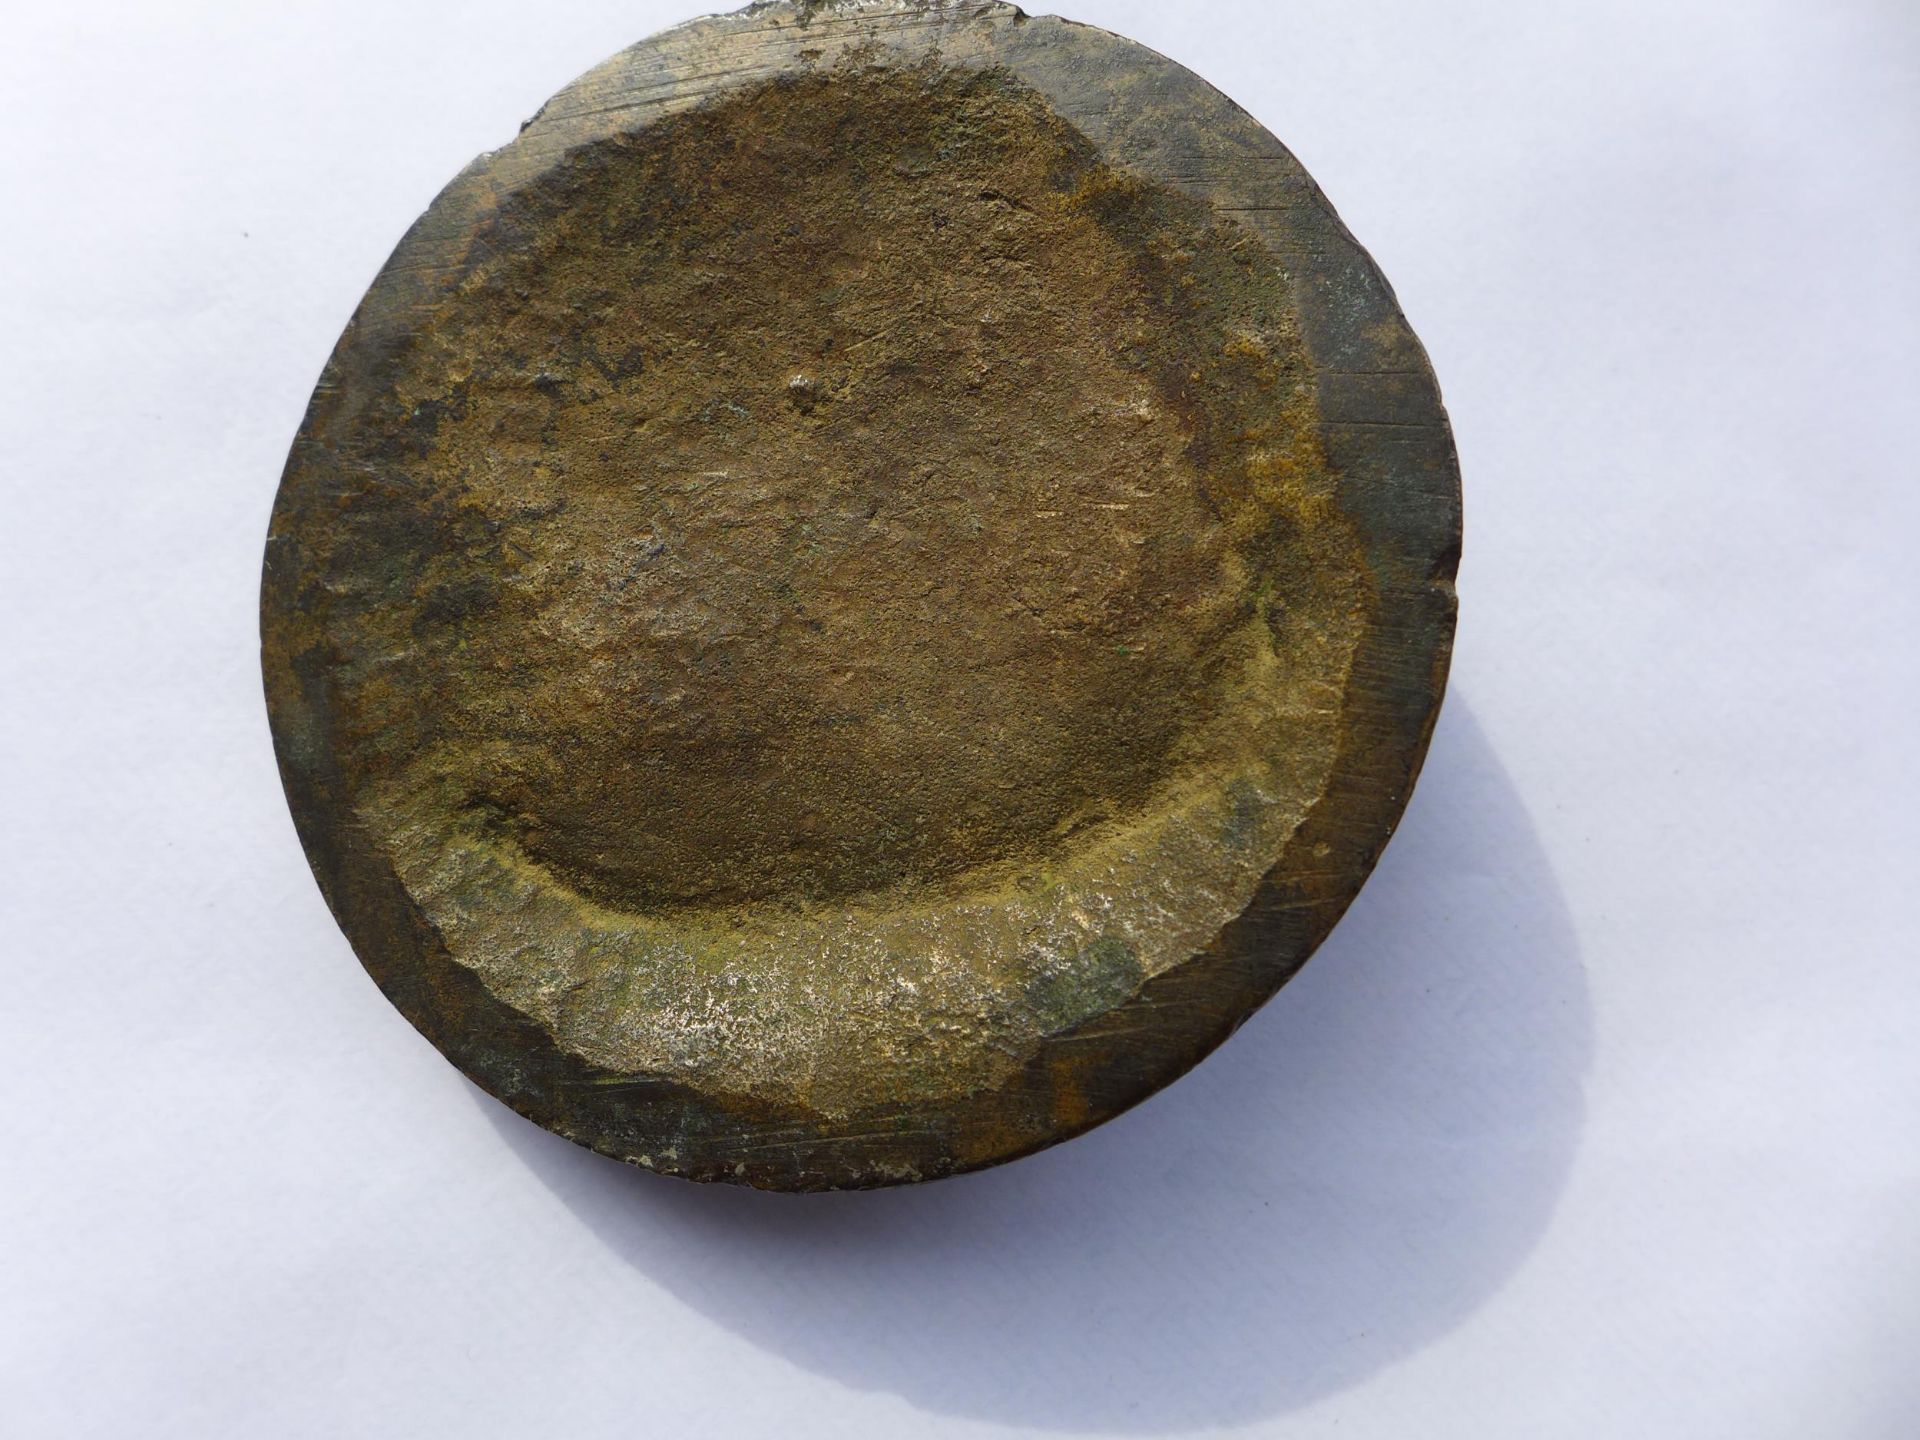 A LARGE RENAISSANCE TYPE BRONZE UNIFACE MEDAL OF A GOD, DIAMETER 8CM, CAST IN HIGH RELIEF - Image 3 of 4